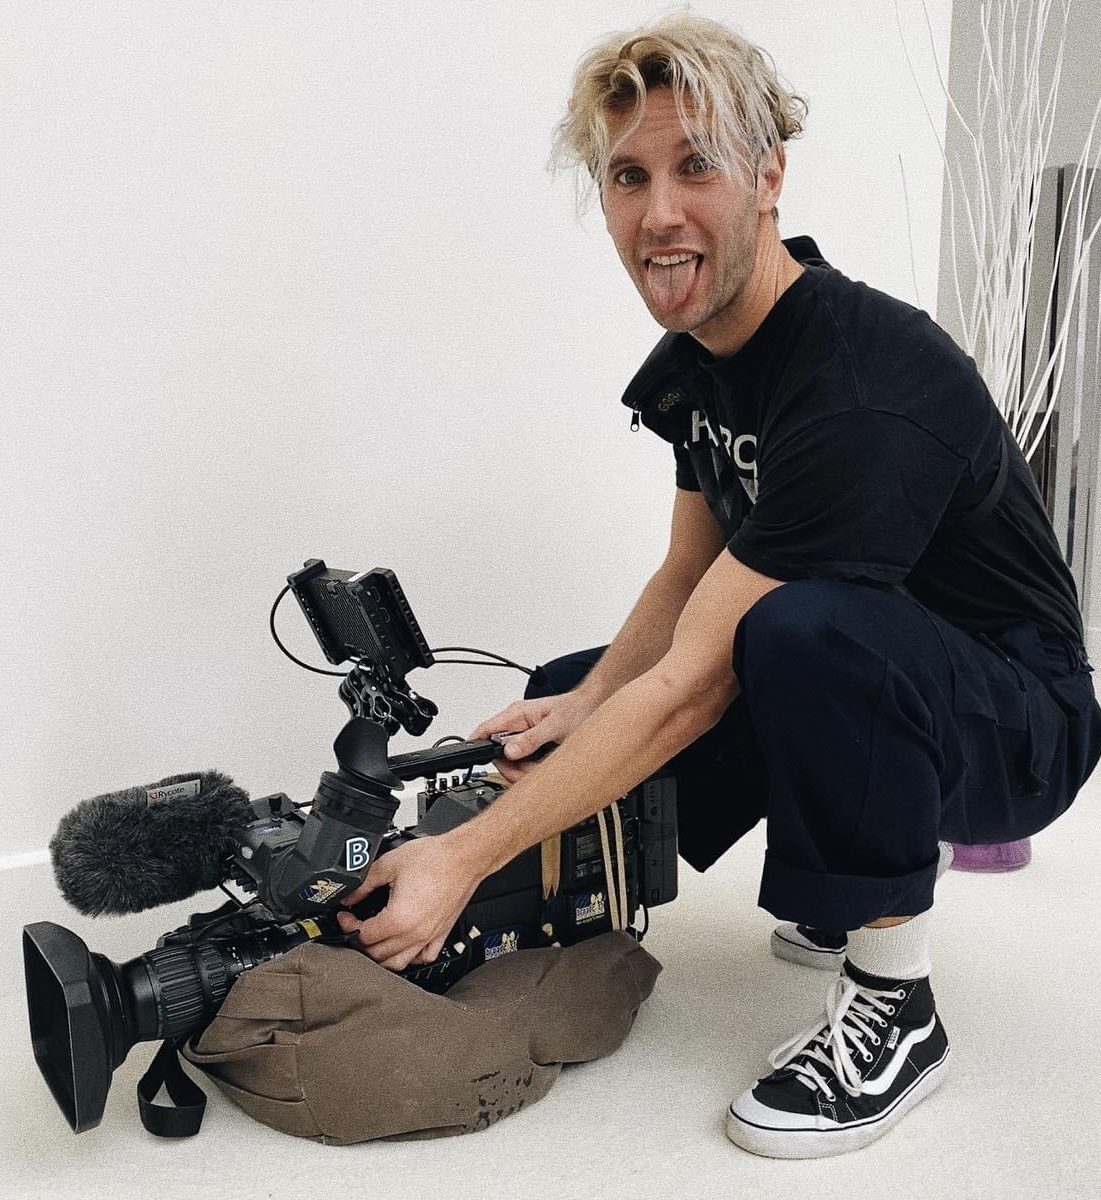 Jamie kneeling down with a camera in his hands while sticking his tongue out.